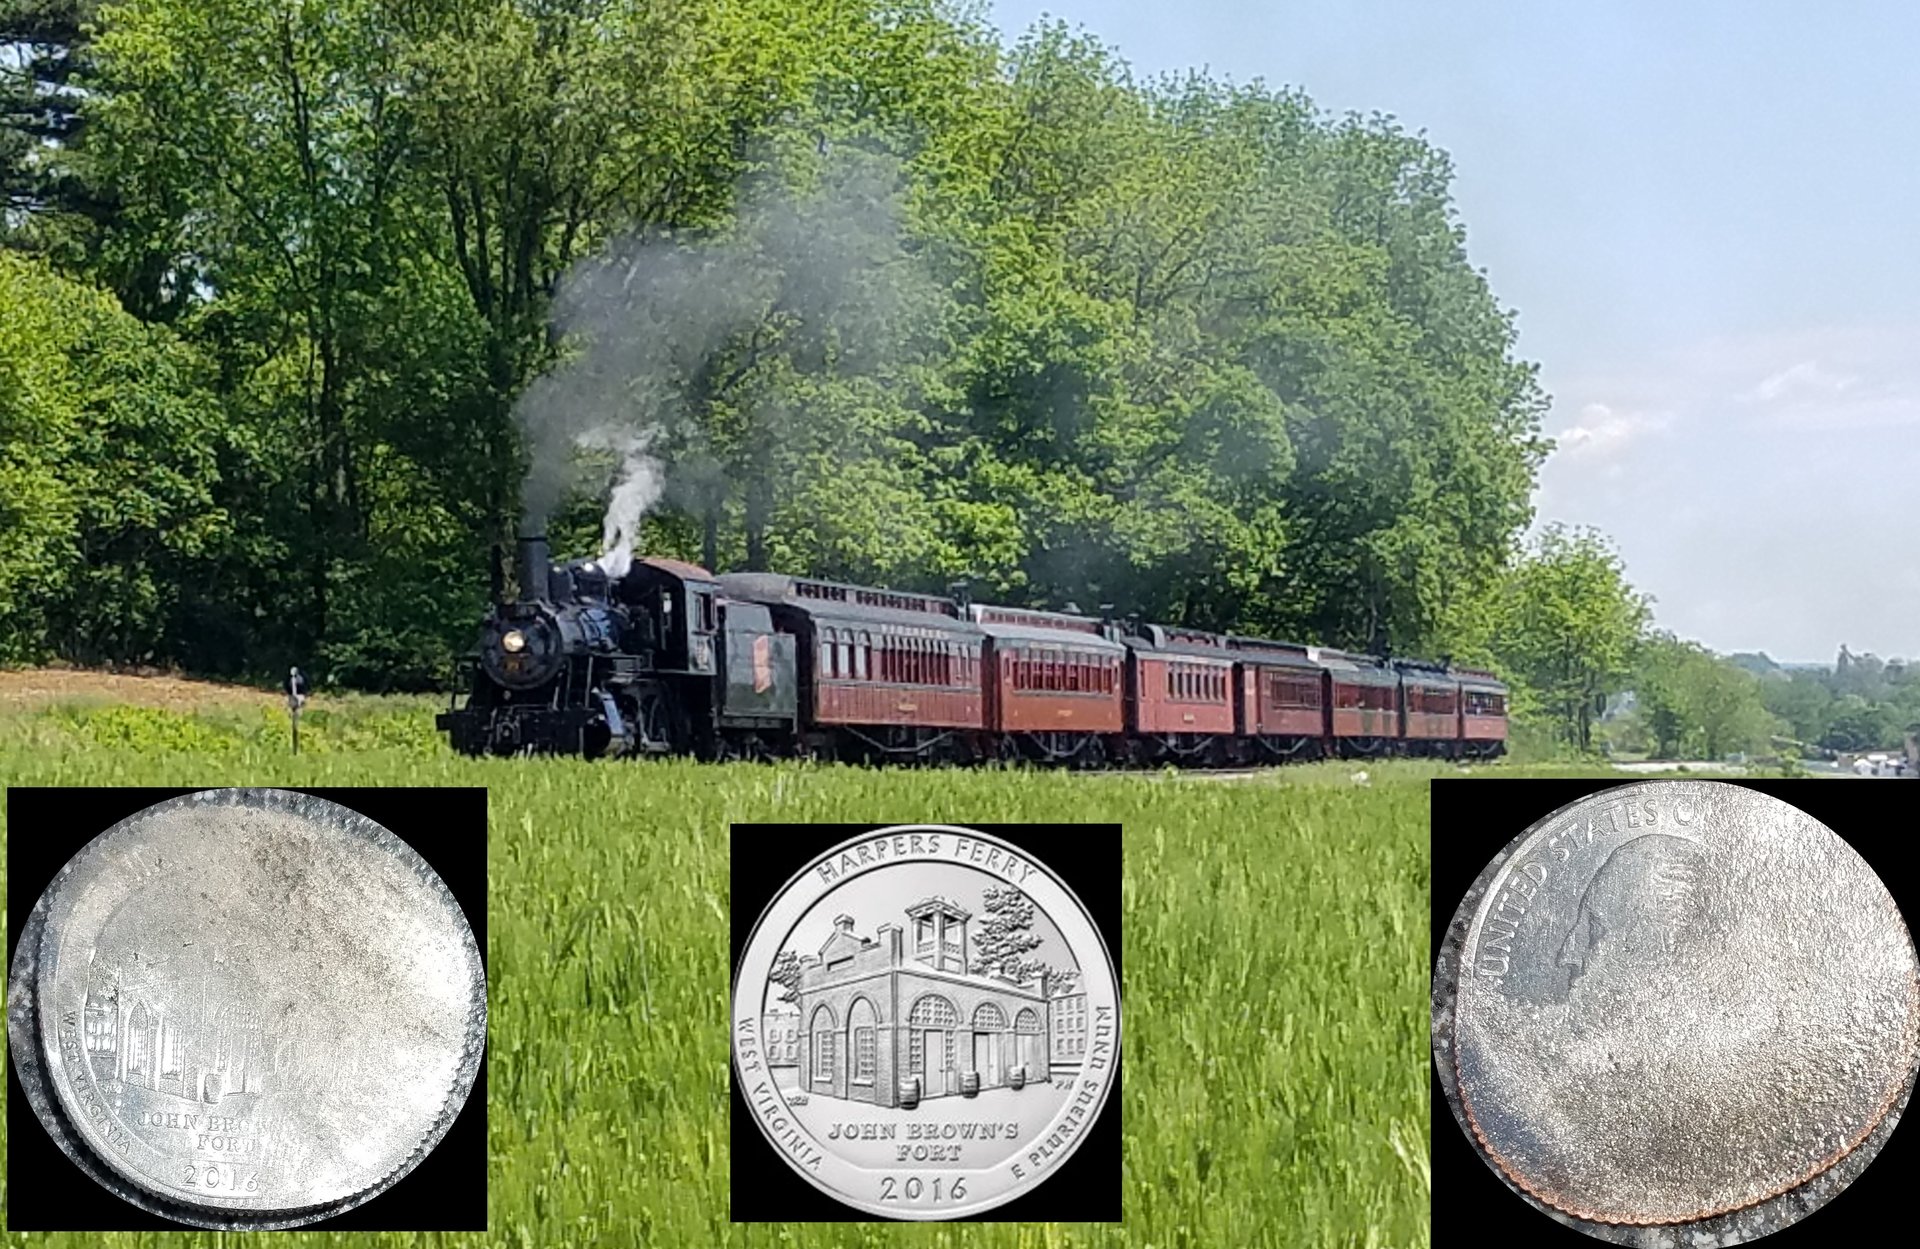 2016 Harpers Ferry Quarter squashed by 89 SRR 5b 15 19.jpg